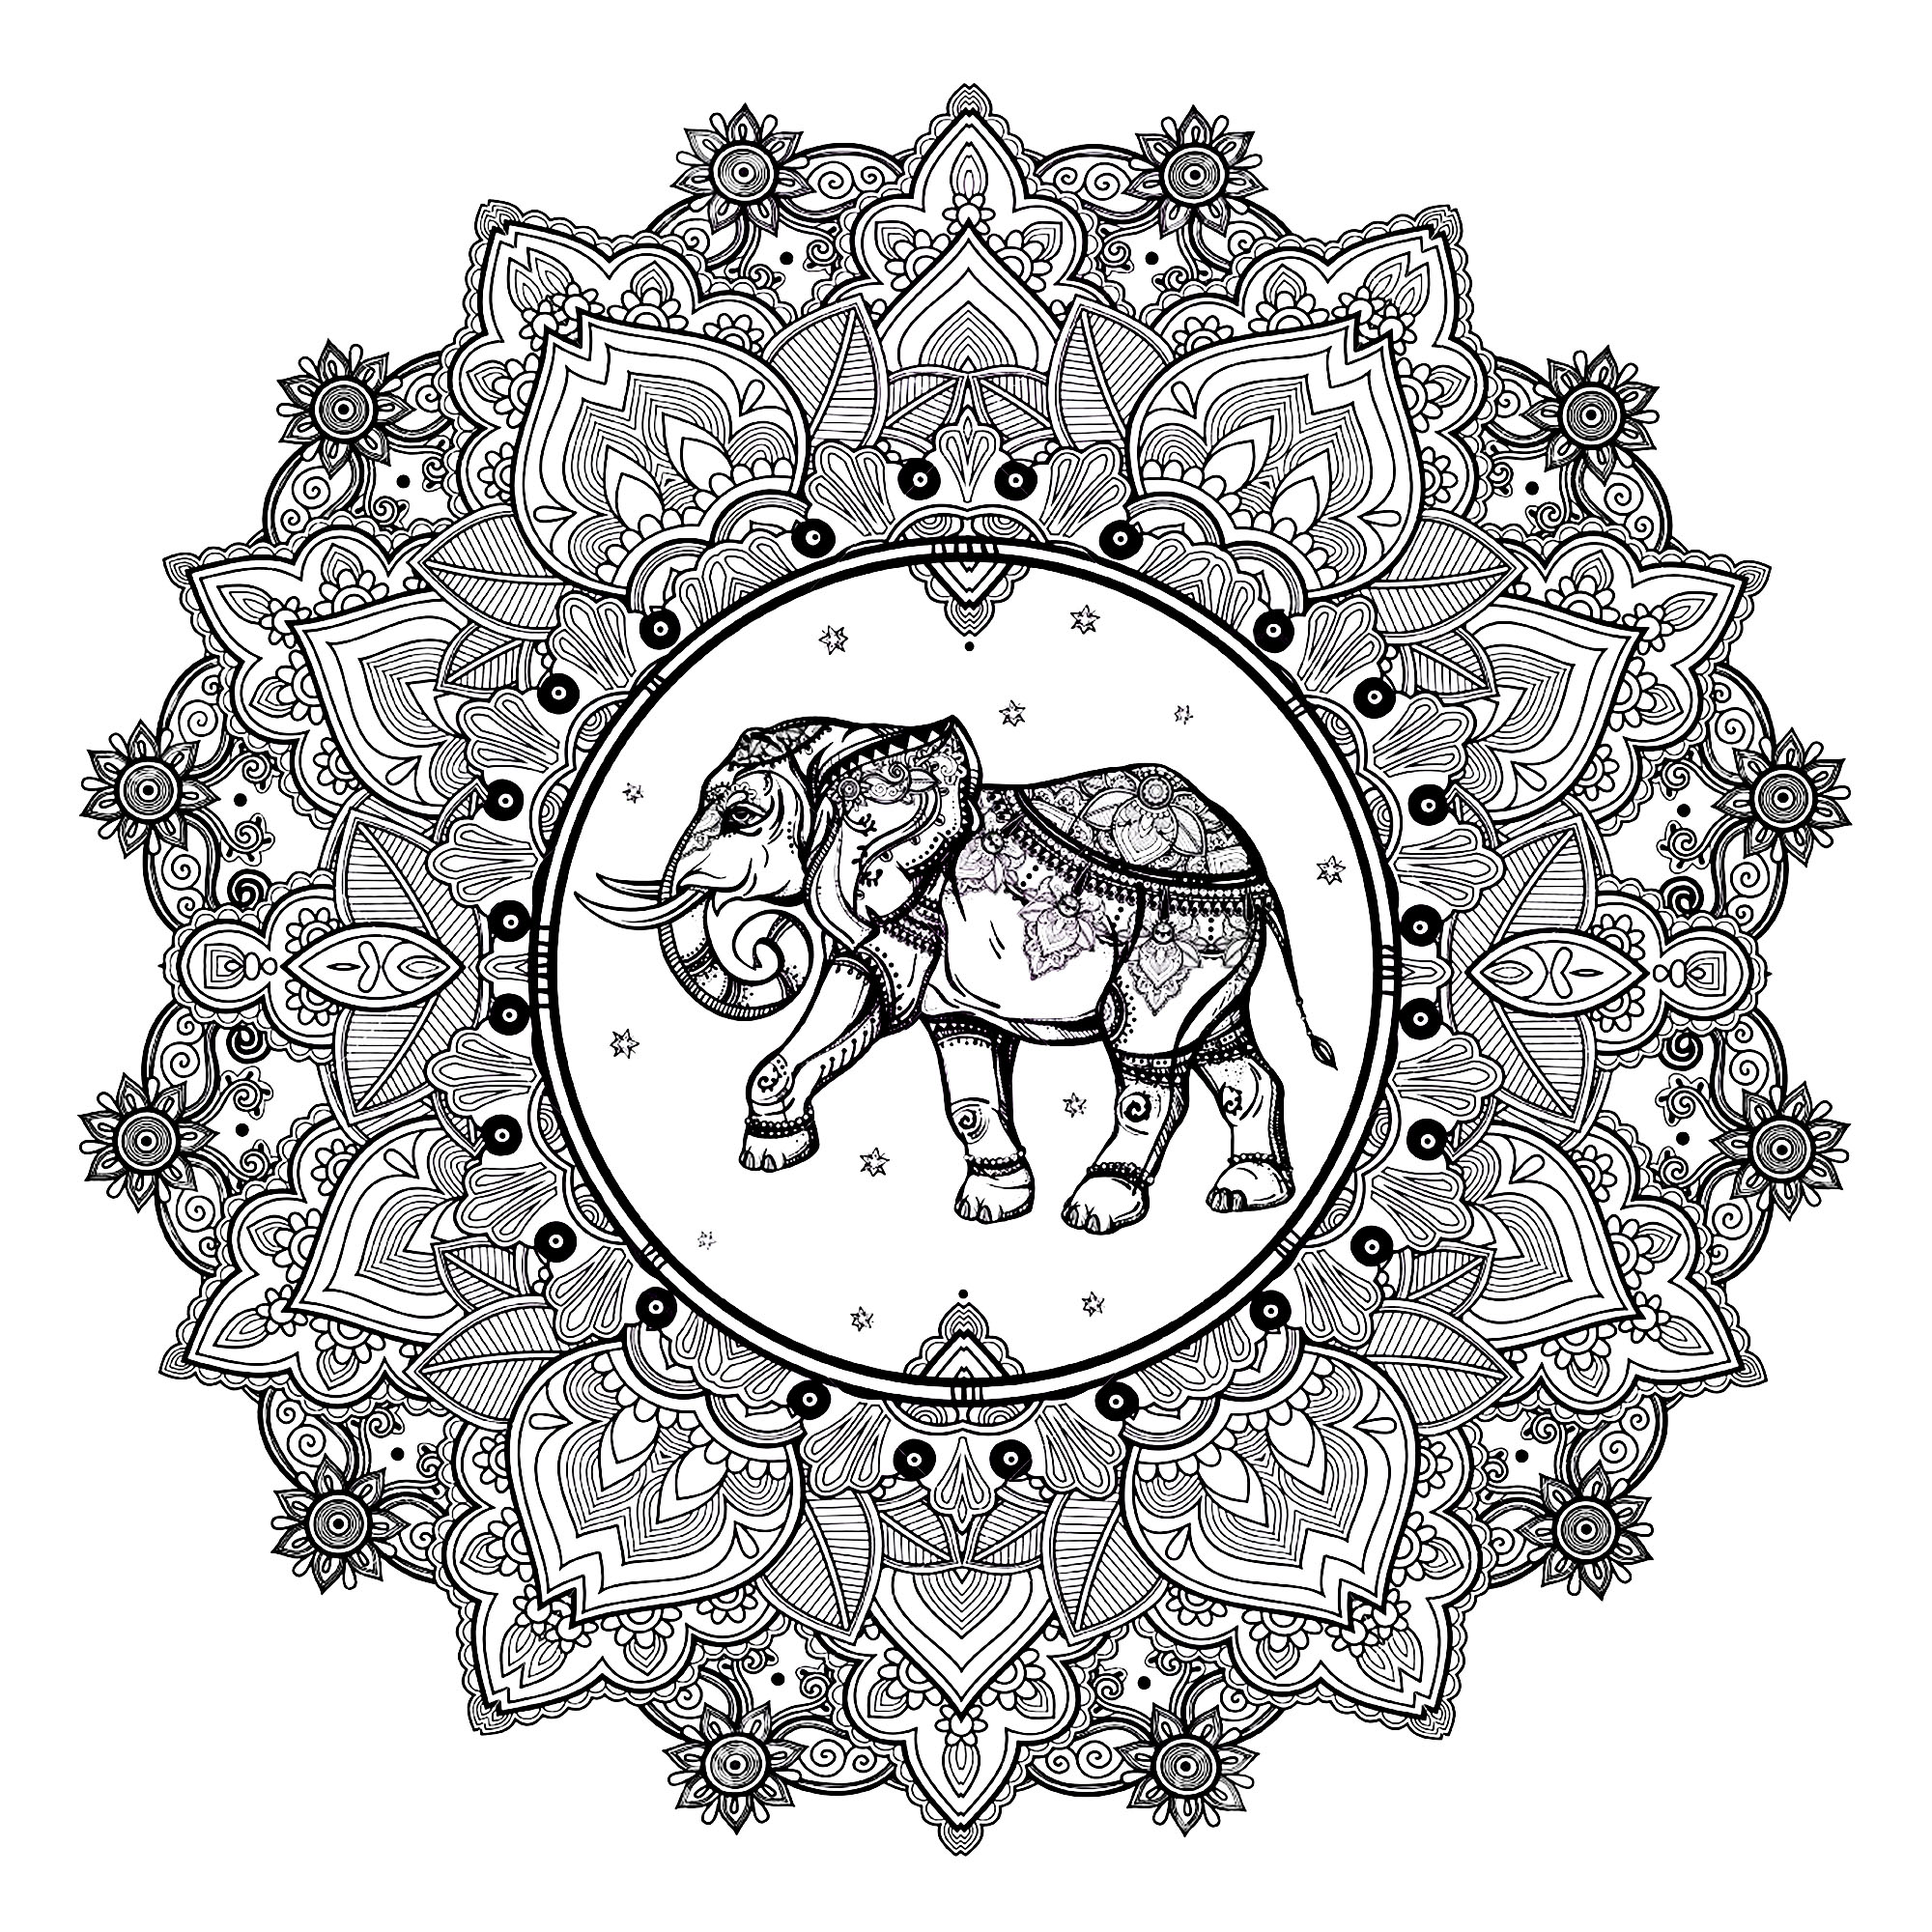 Mandala with elephant and Indian inspired patterns - Mandalas with animals